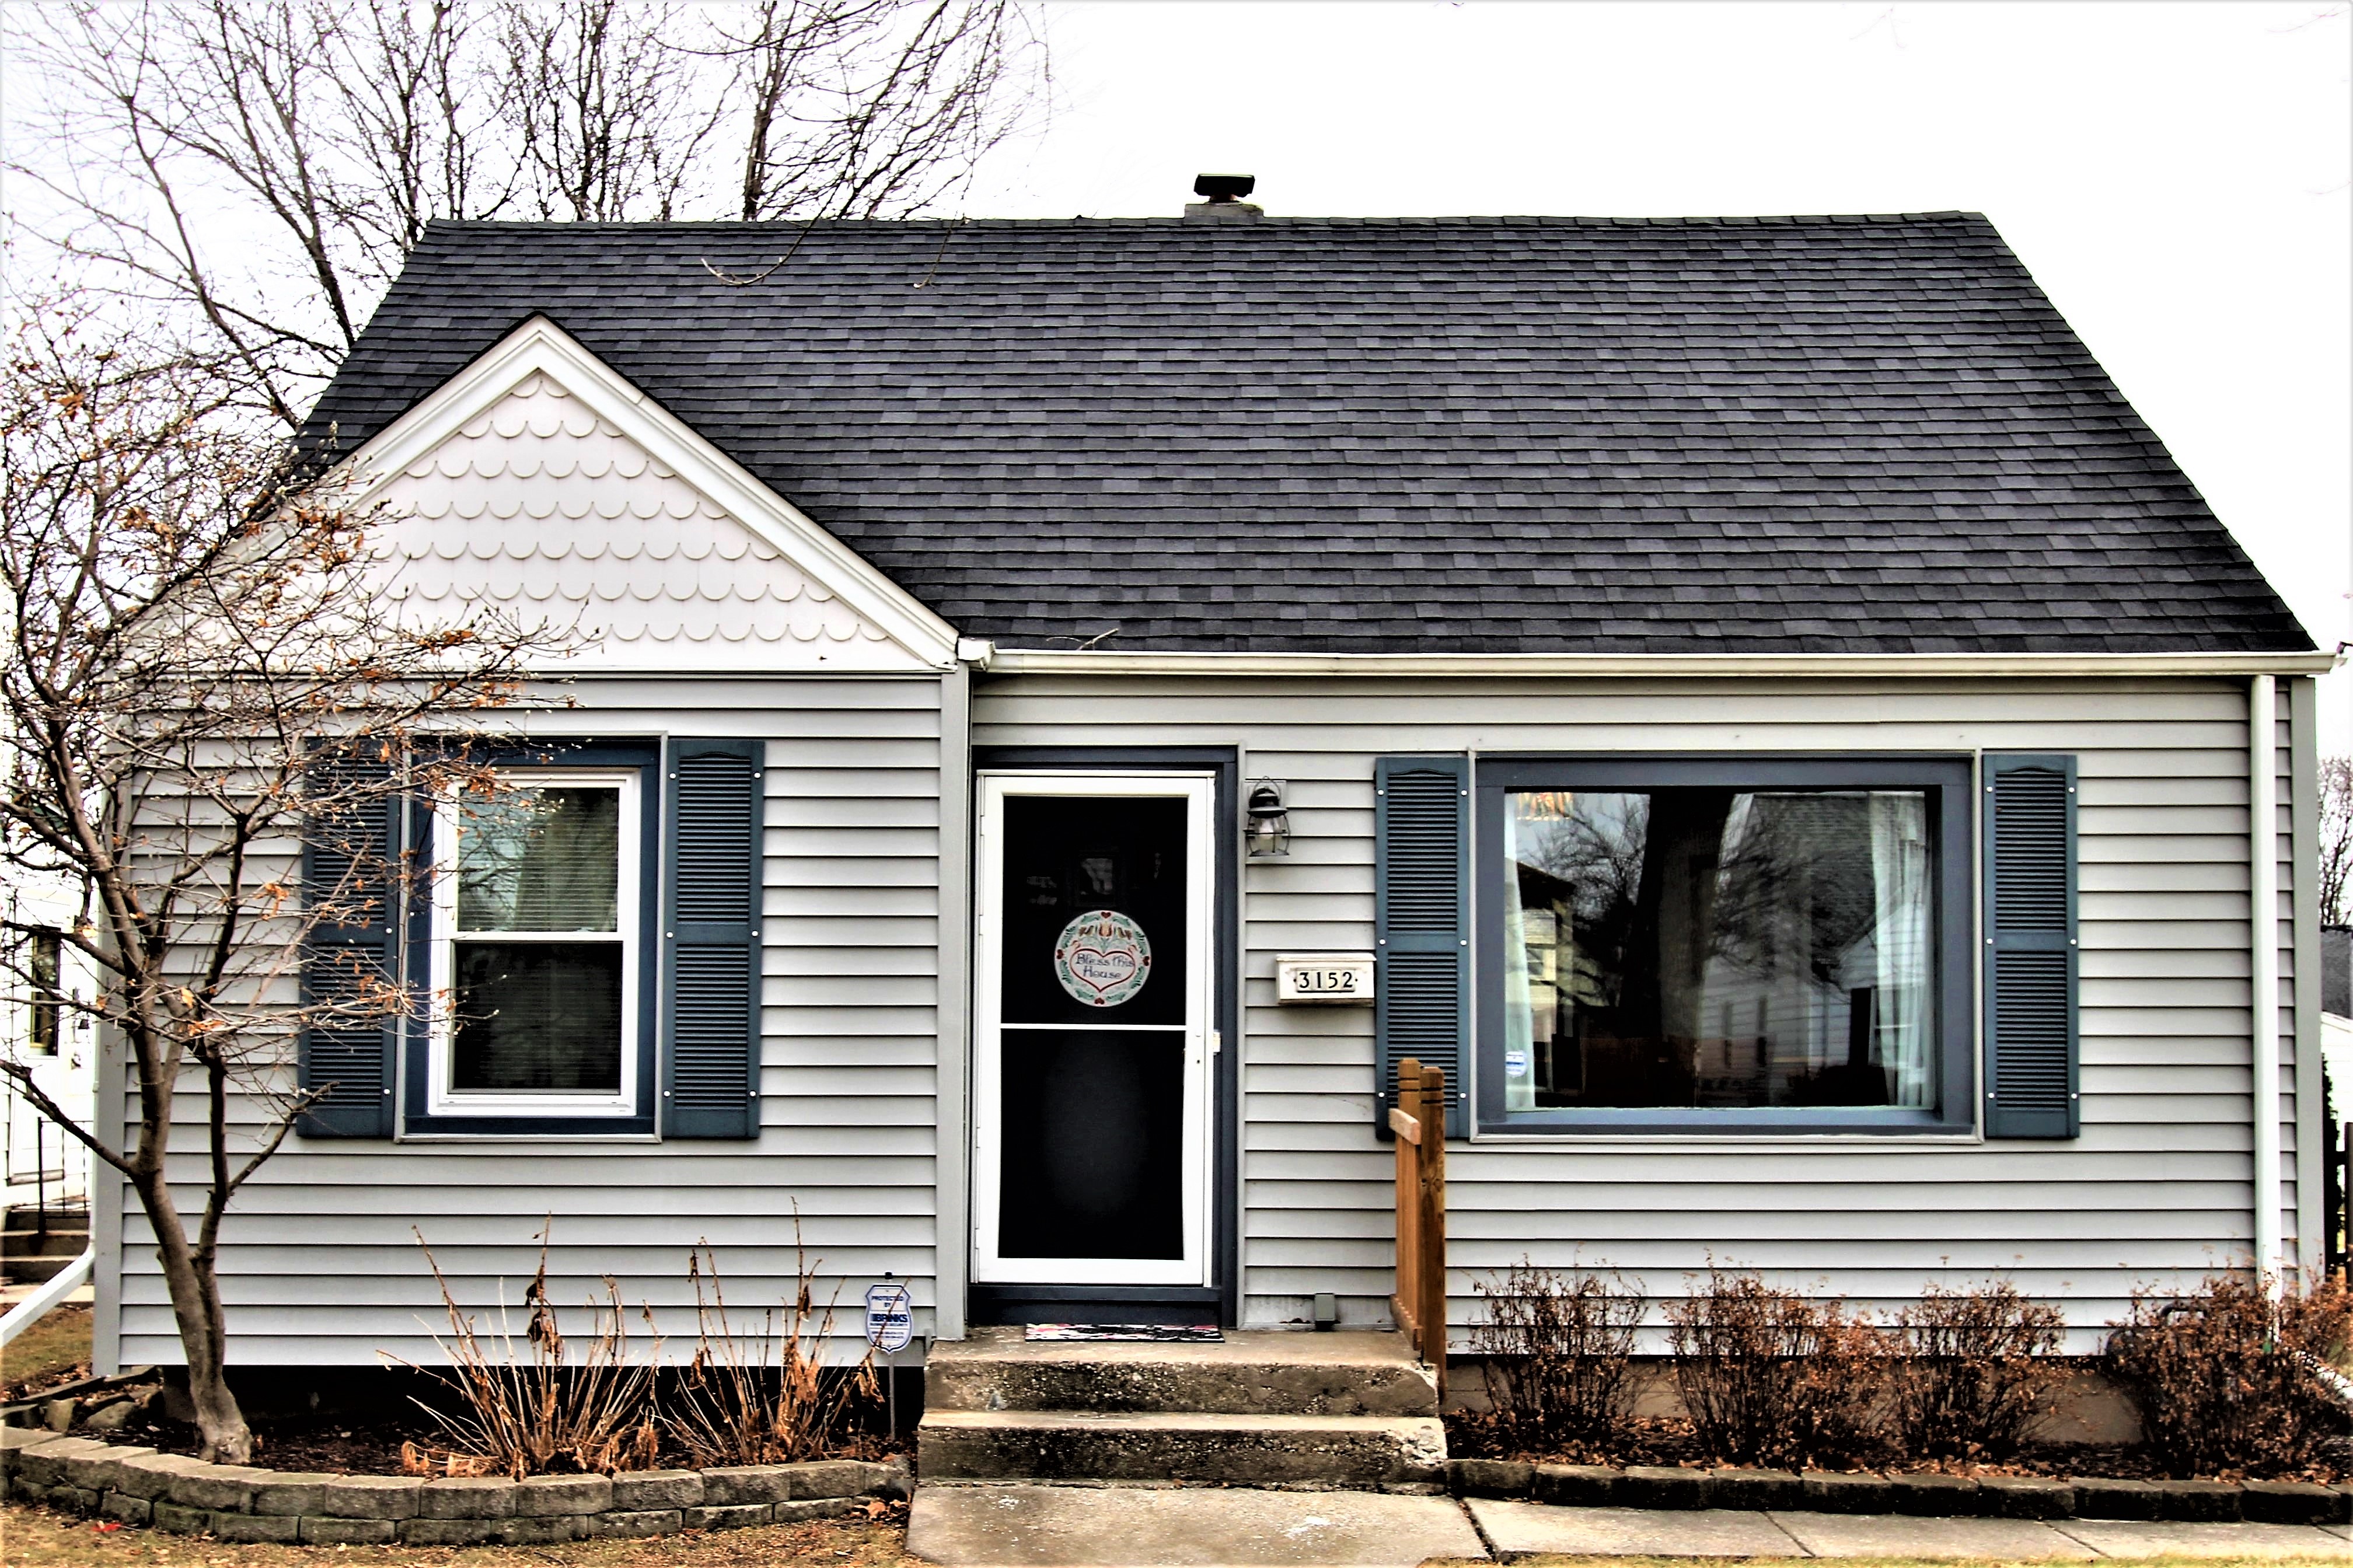 BEAUTIFUL WELL MAINTAINED 3 BEDROOM, 1.5 BATH CAPE COD FOR ONLY $139,900!!!